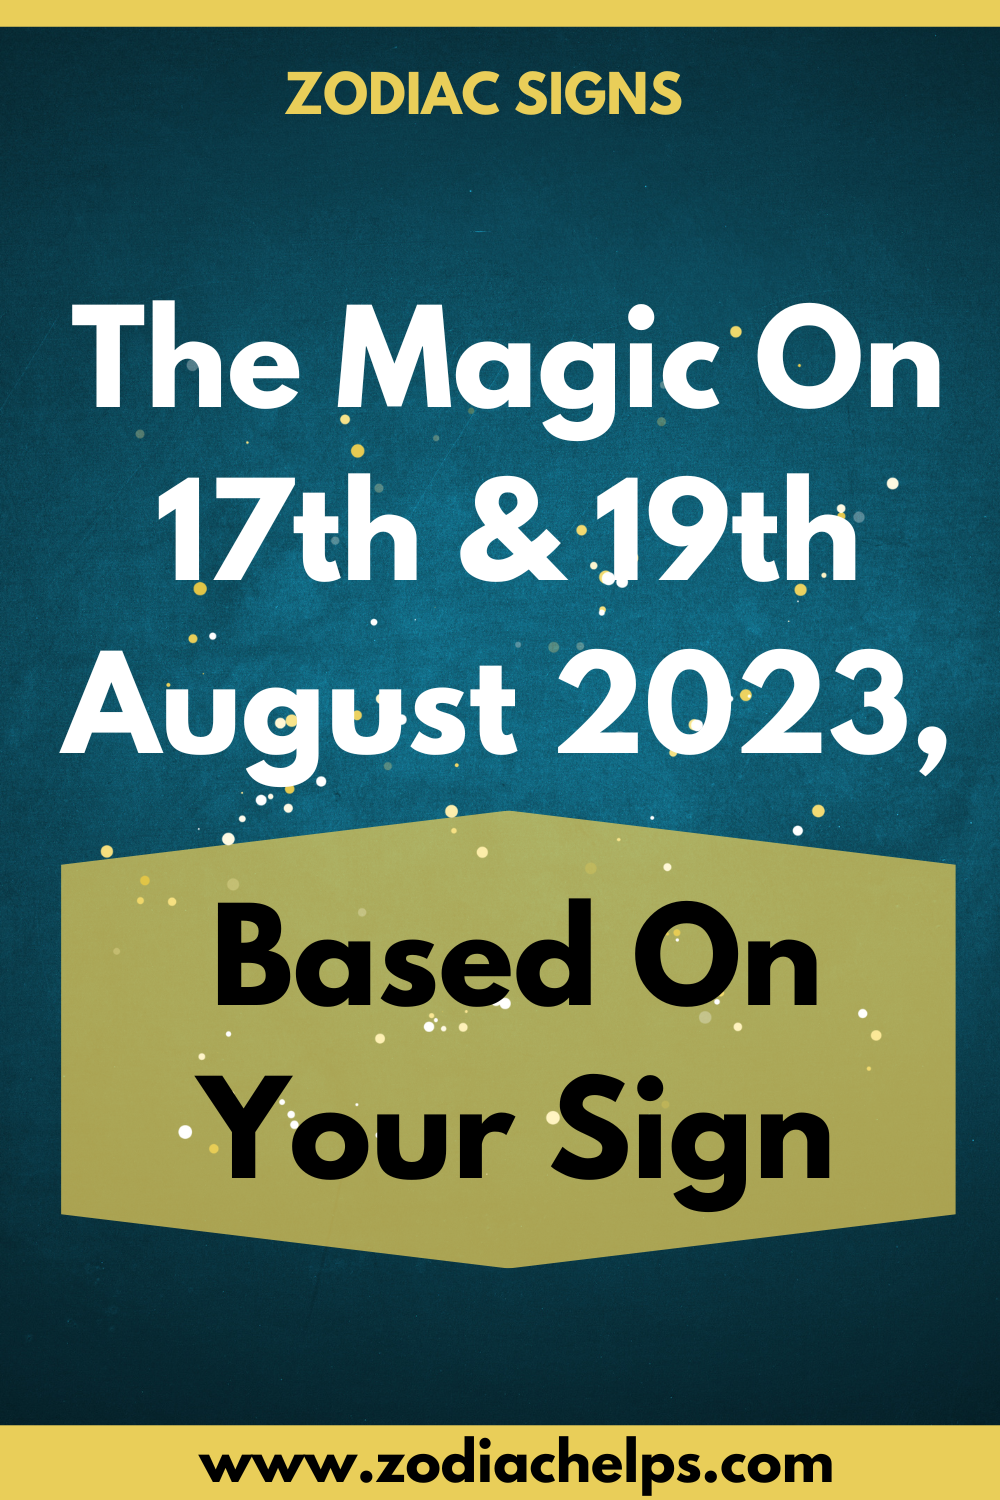 The Magic On 17th & 19th August 2023, Based On Your Sign